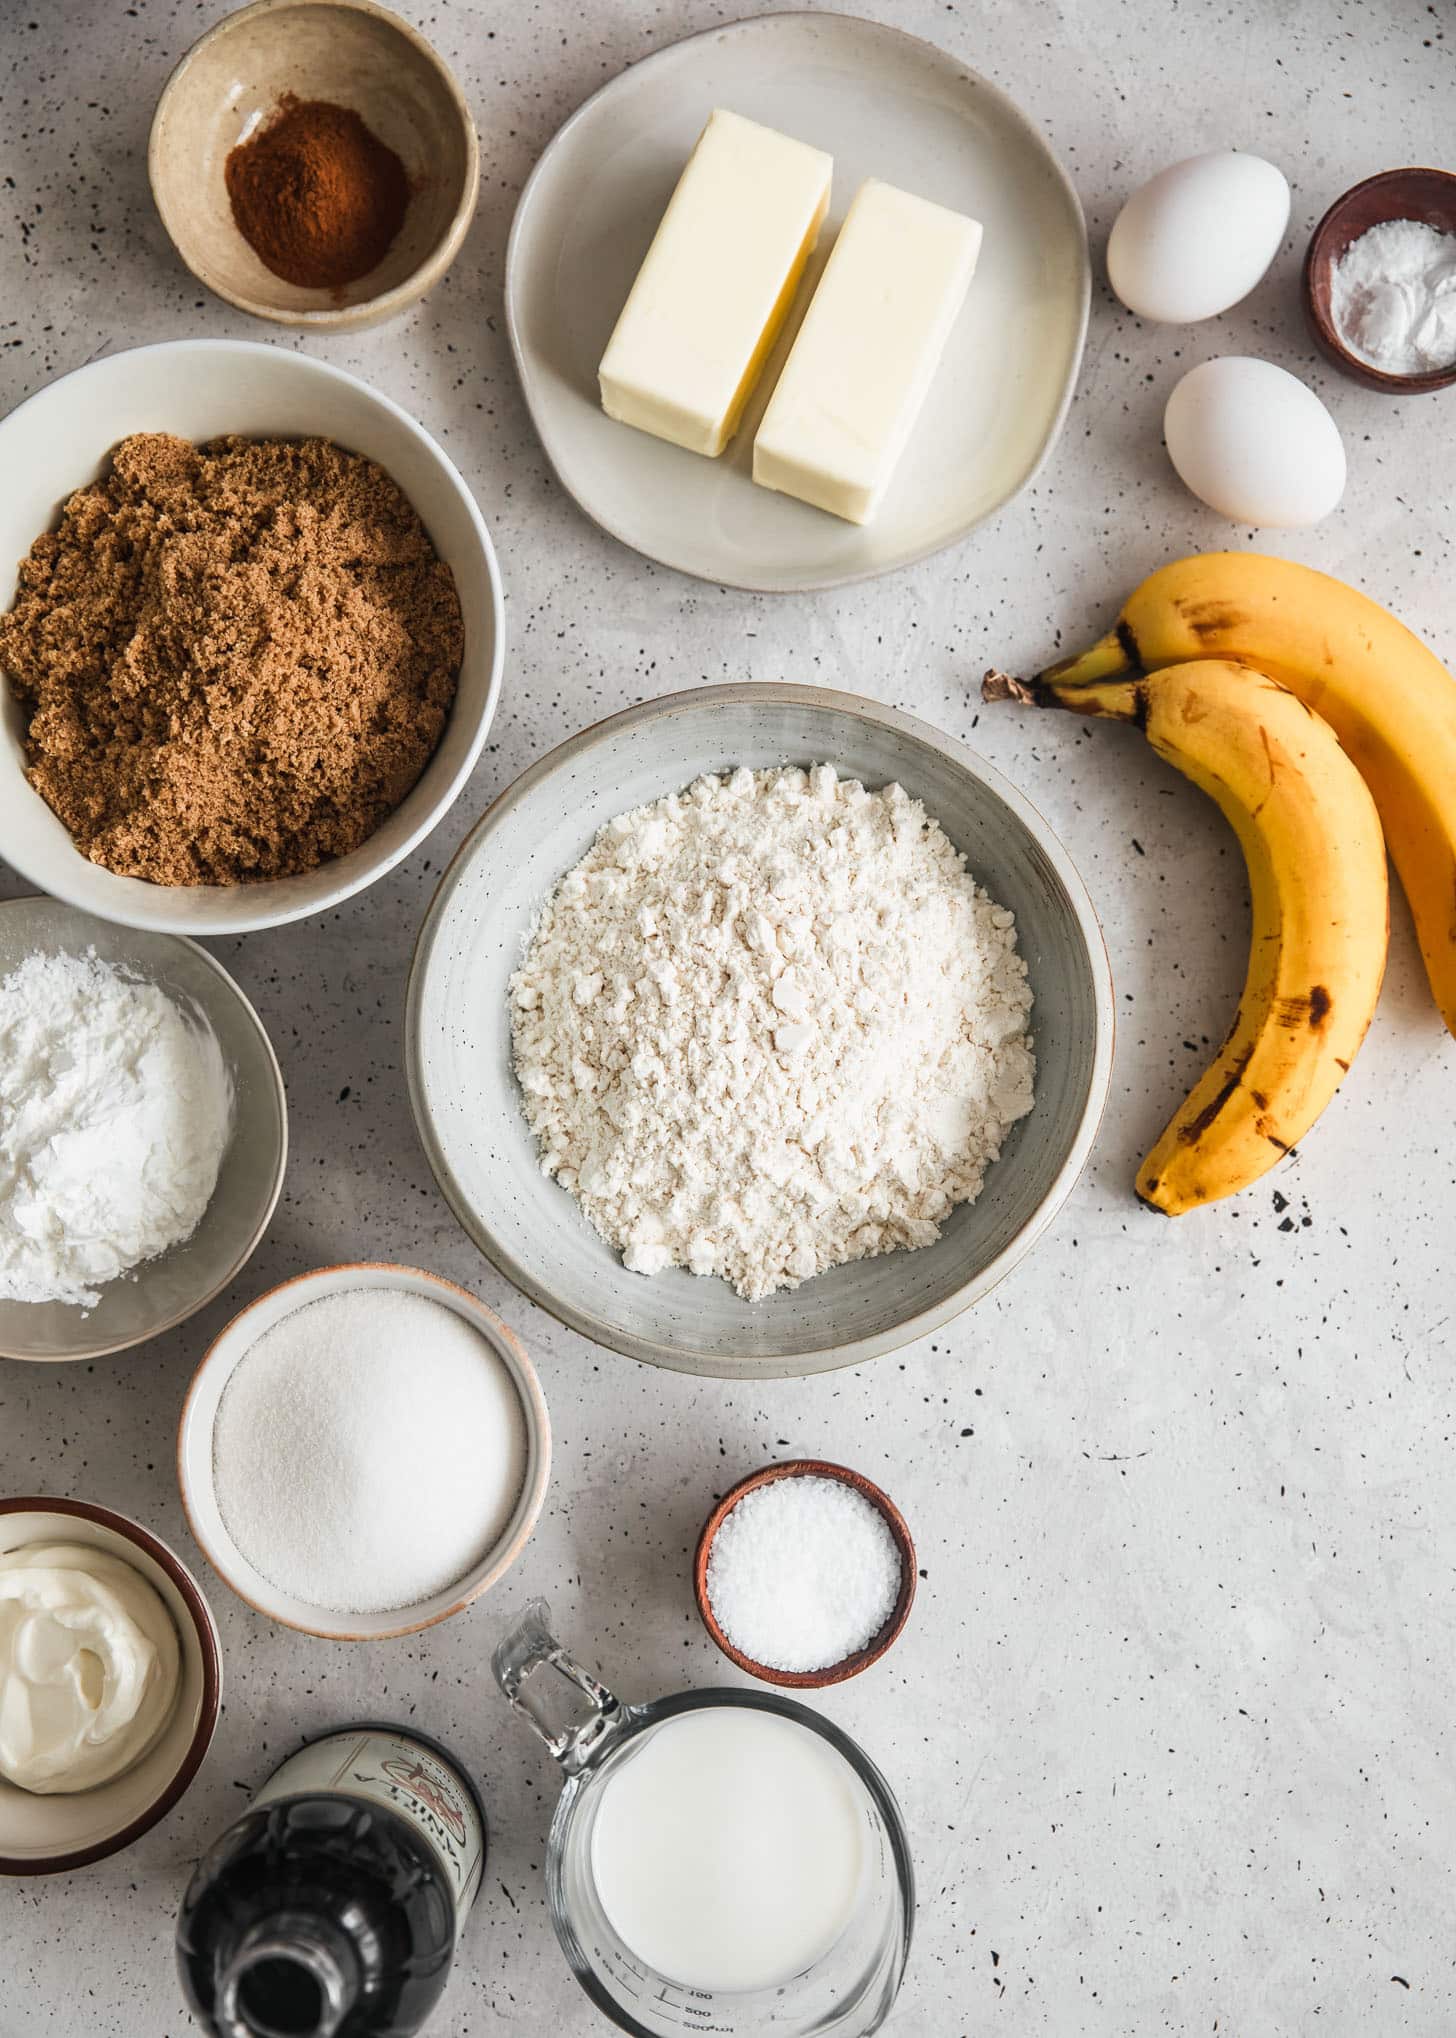 White and grey bowls of baking ingredients on a white counter next to bananas and butter.